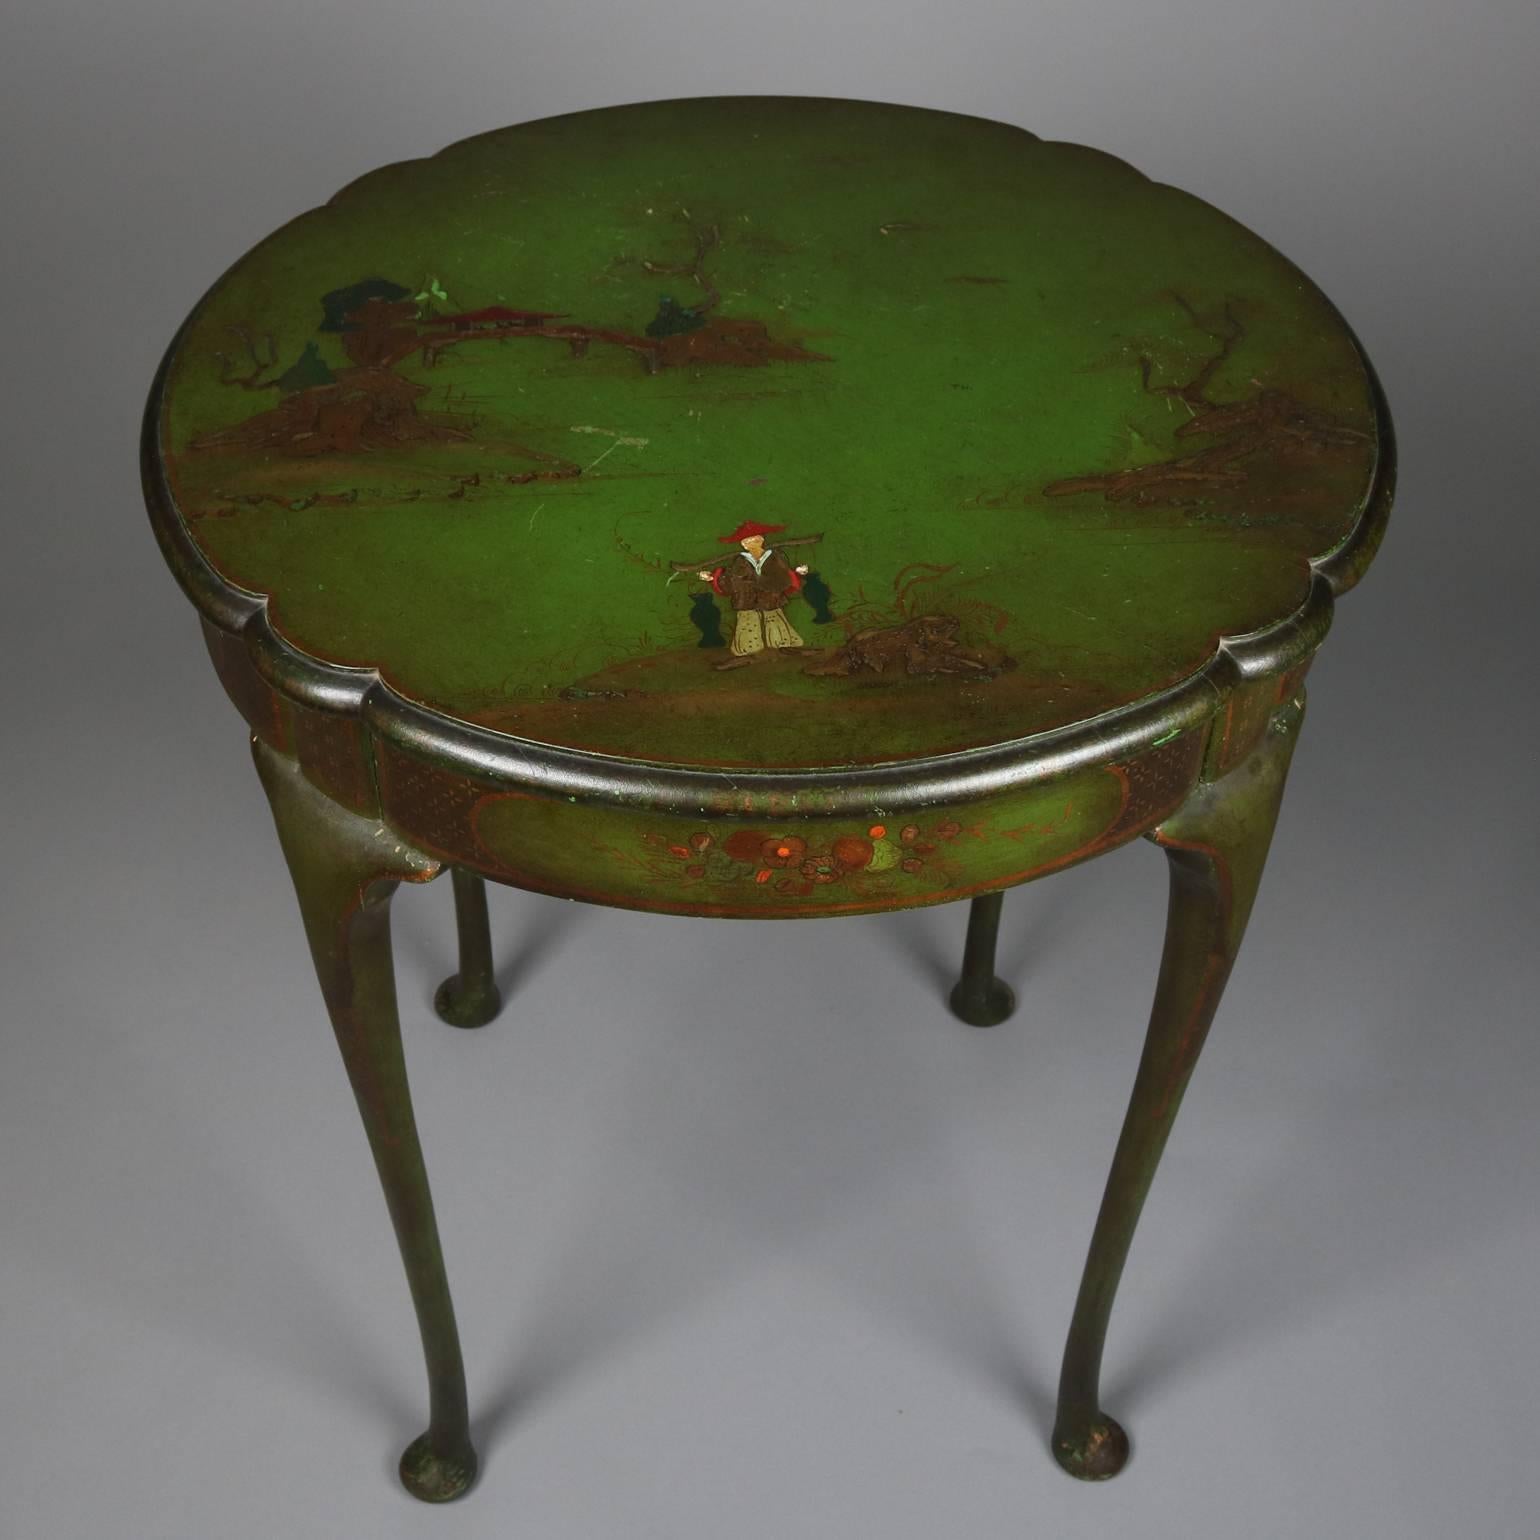 Hand-Painted Vintage Paint Decorated Chinoiserie Centre Table, Fisherman in Landscape